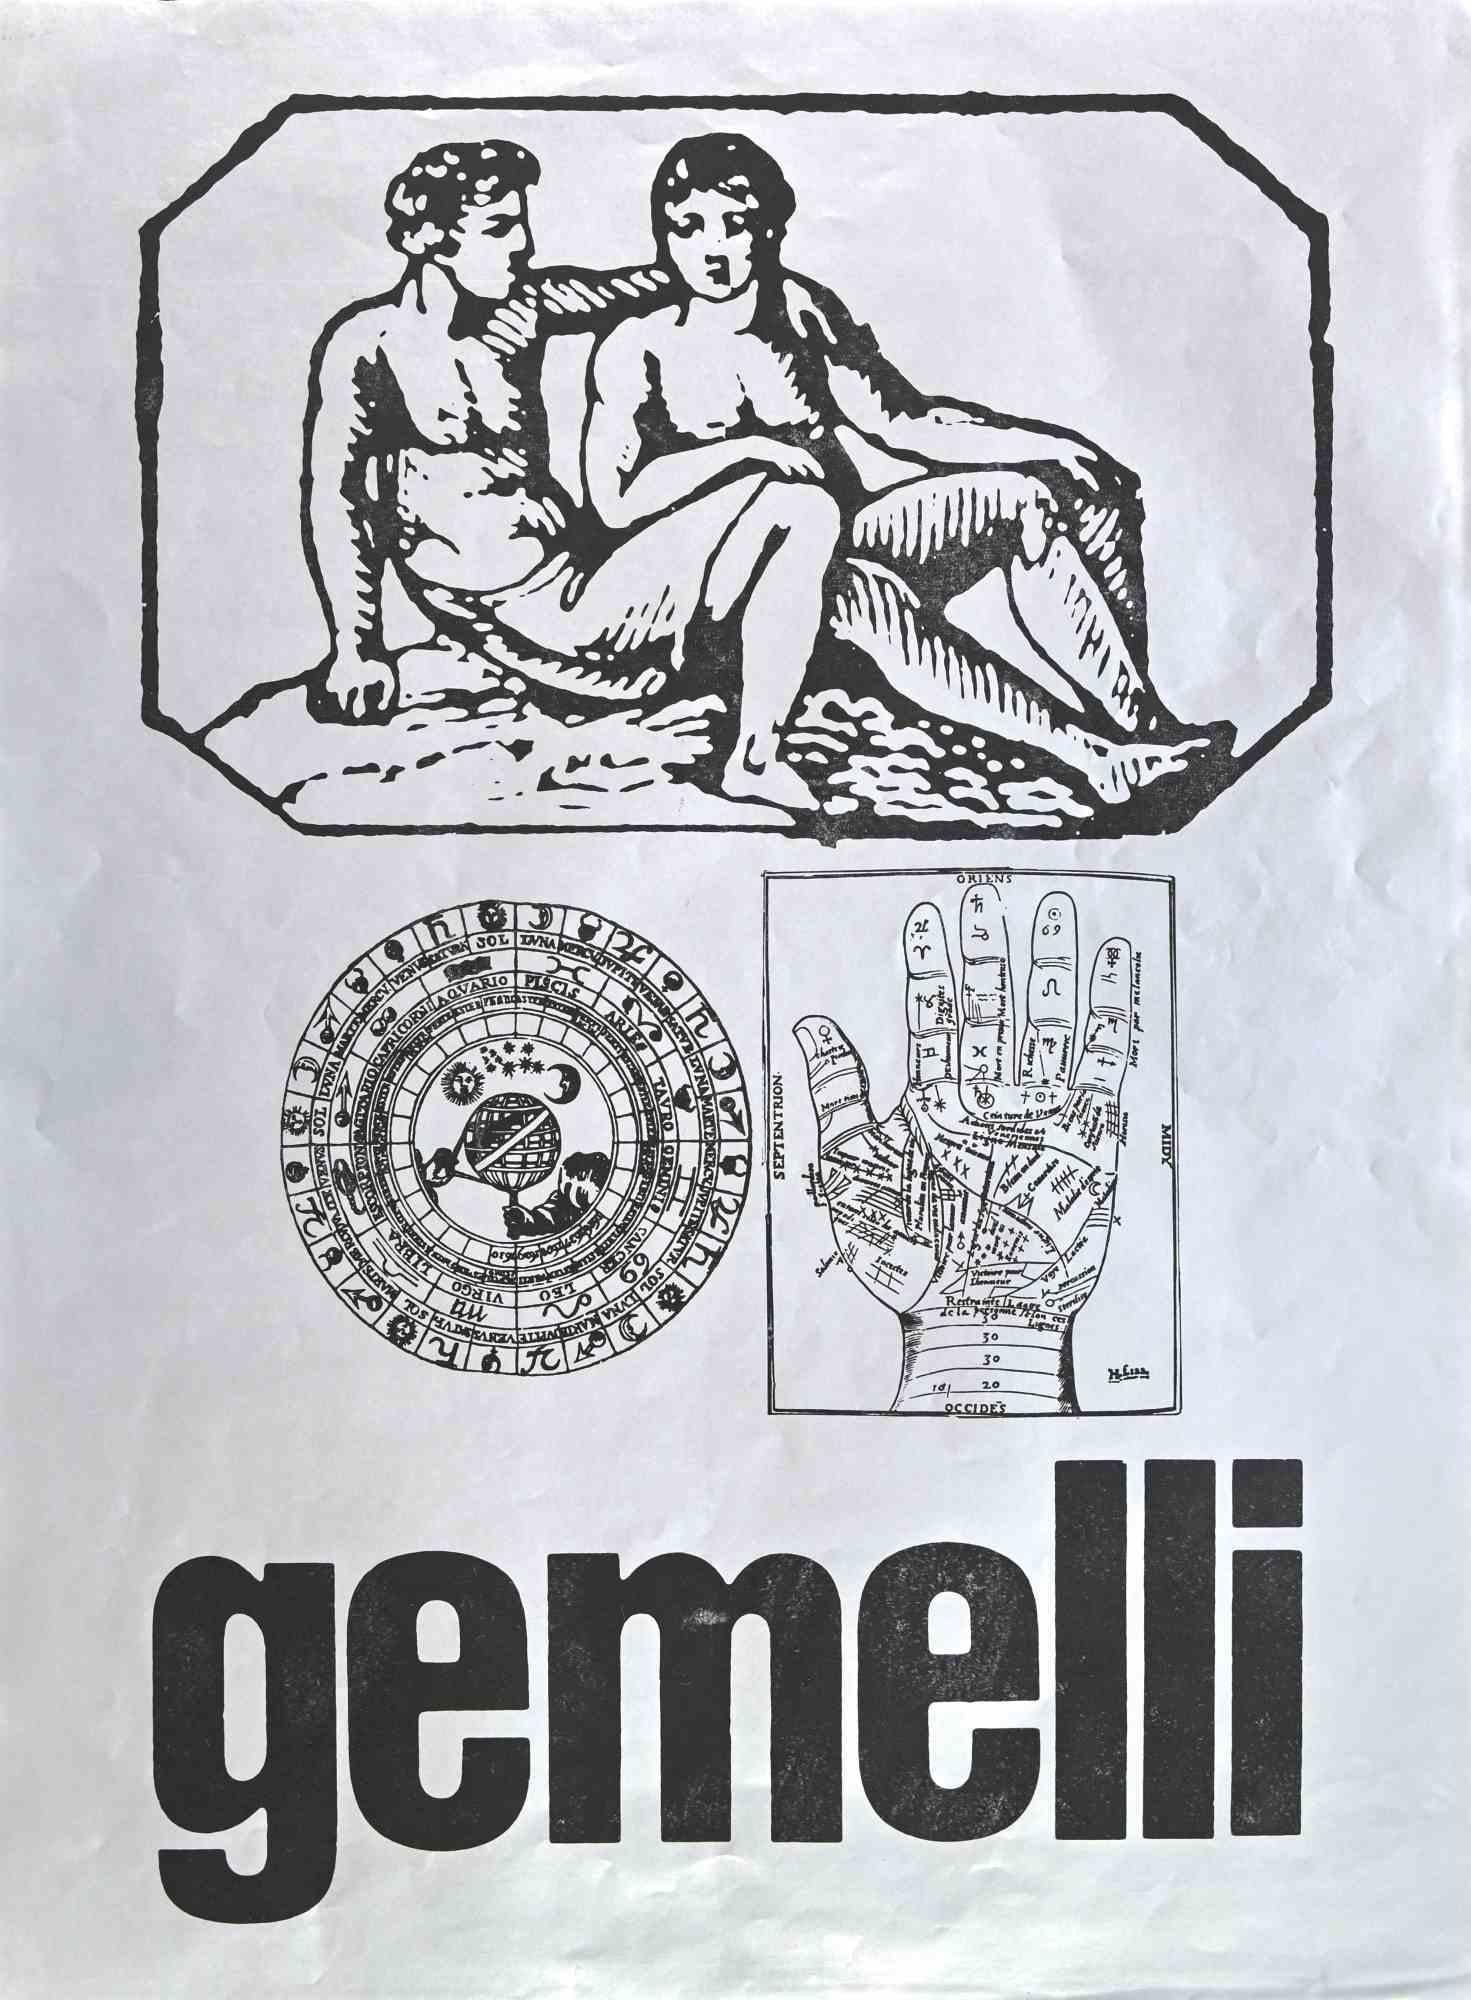 Gemini is a screen print on grey paper realized by Sergio Barletta in 1973. 

68 x 49 cm.

Good conditions!

Sergio Barletta  (1934) is an Italian cartoonist and illustrator, who has also published some humorous and political satire books. From the